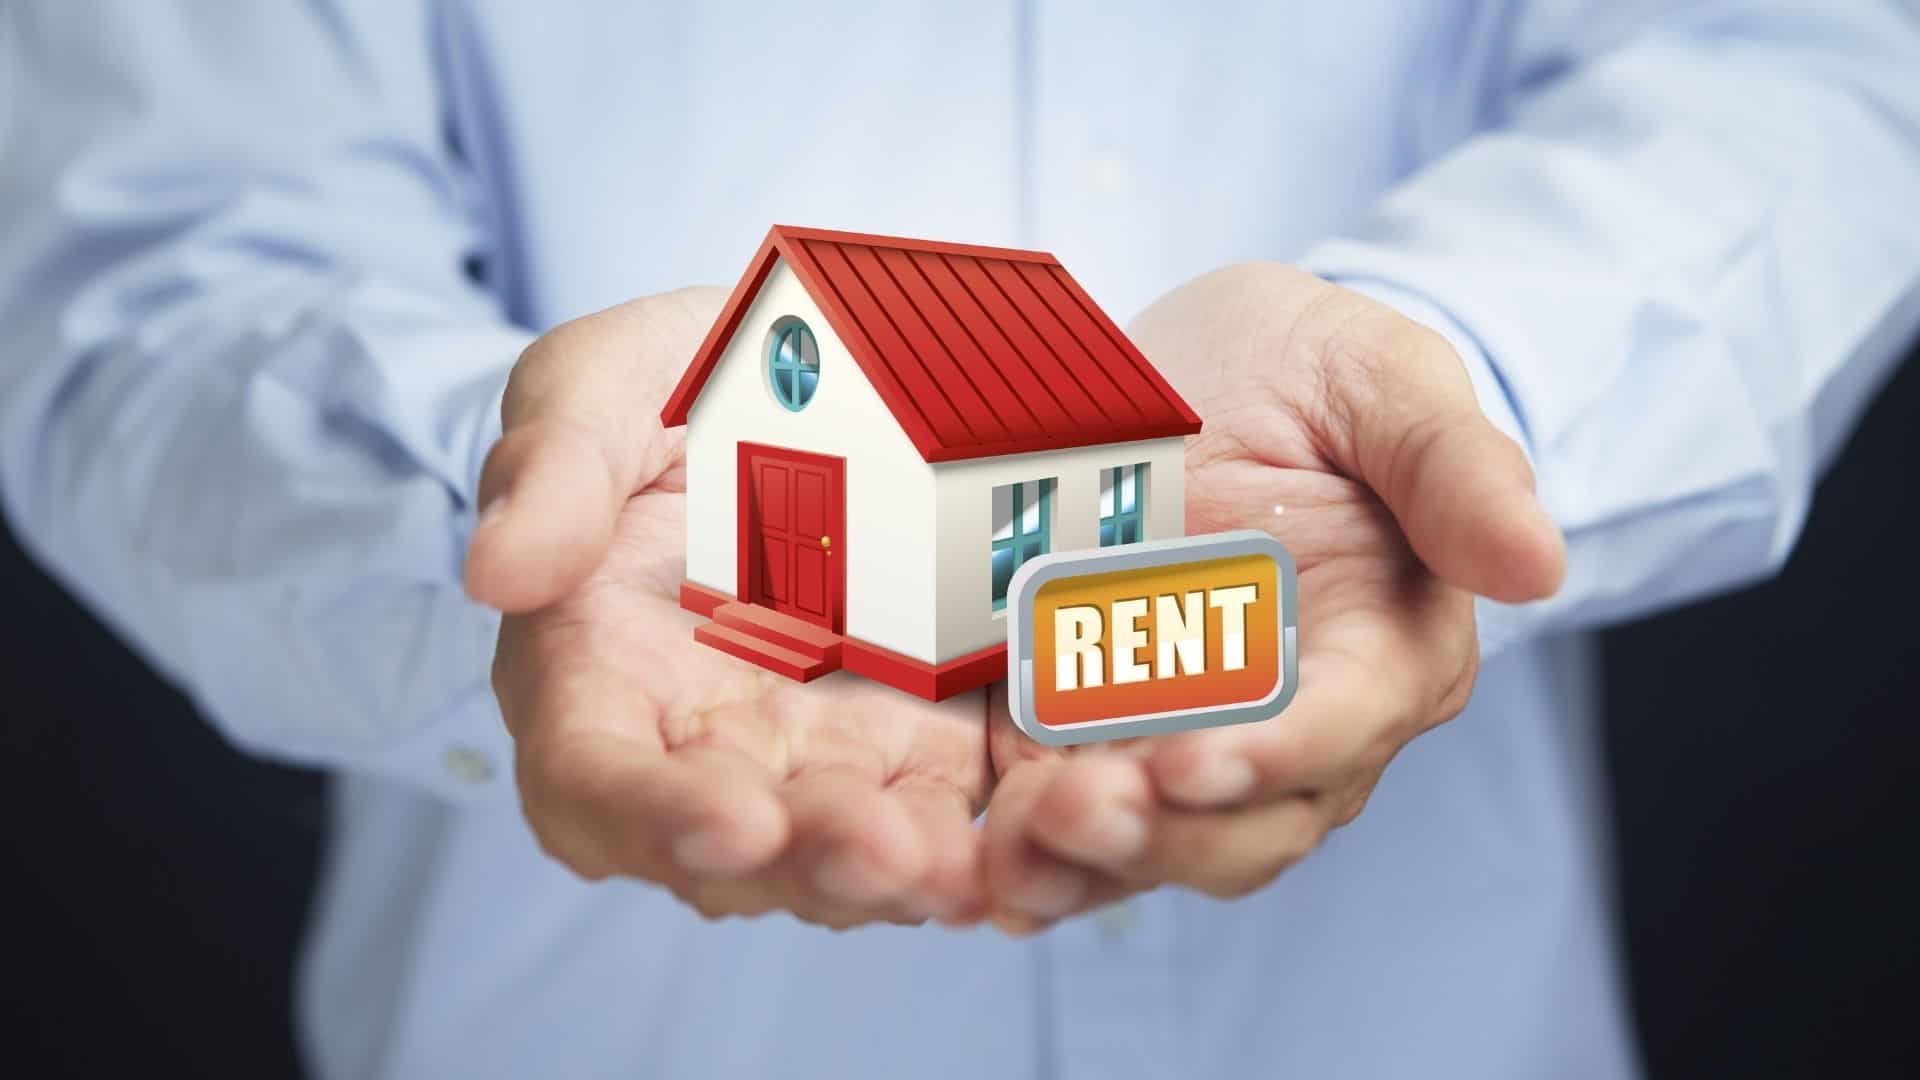 4 Reasons Why Renting Could Be Better Than Buying